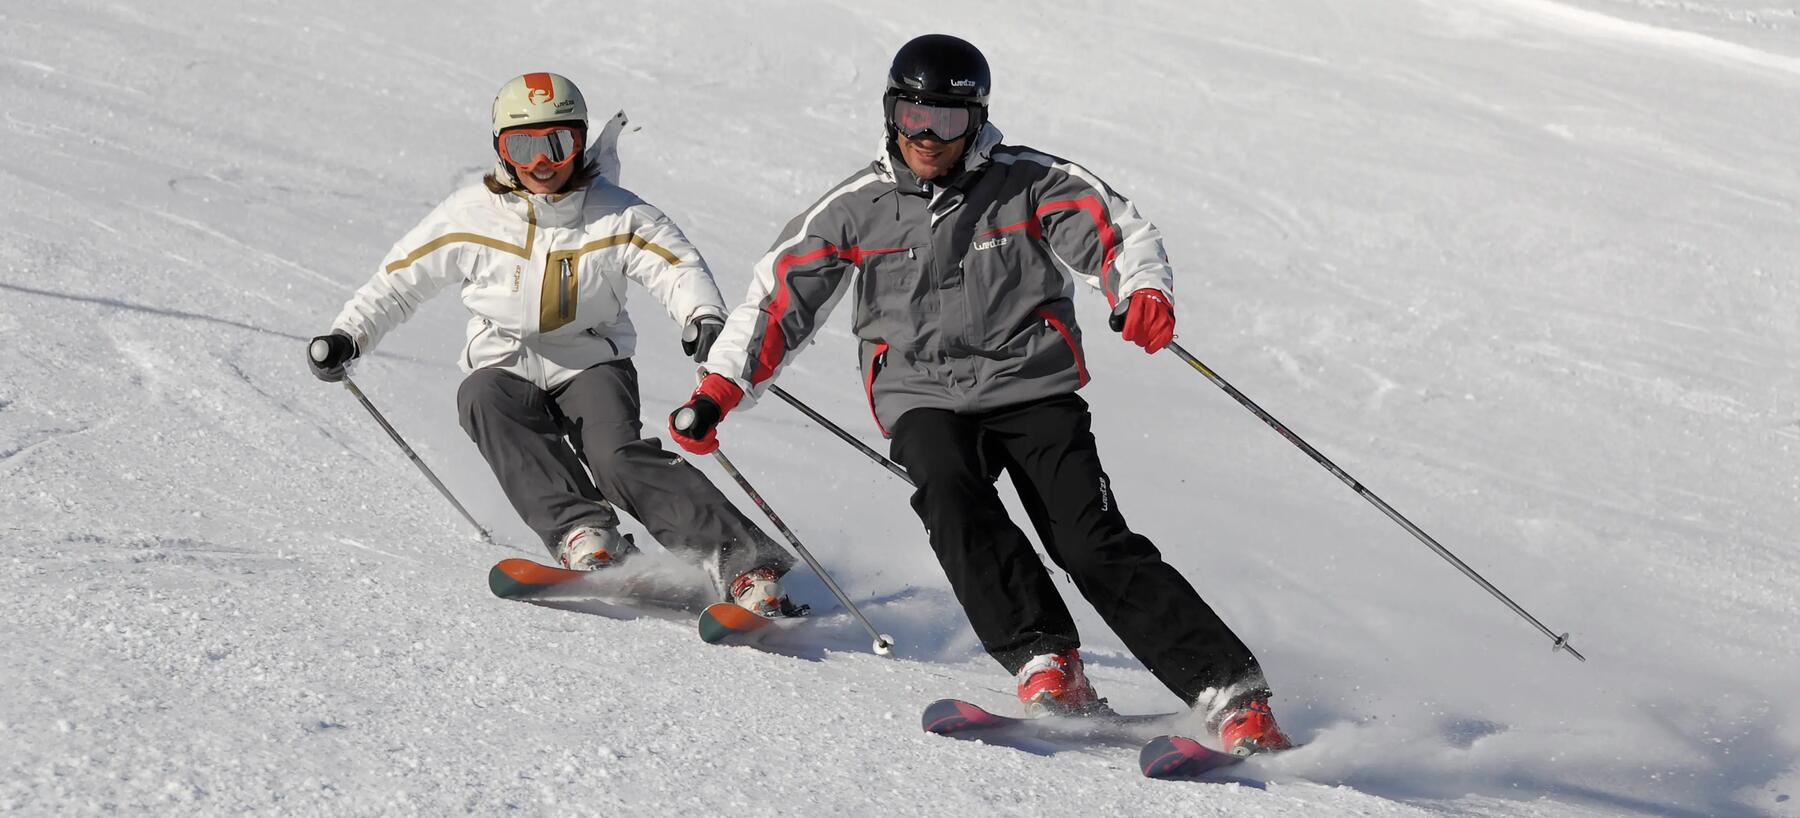 Two skiers on an on-piste slope